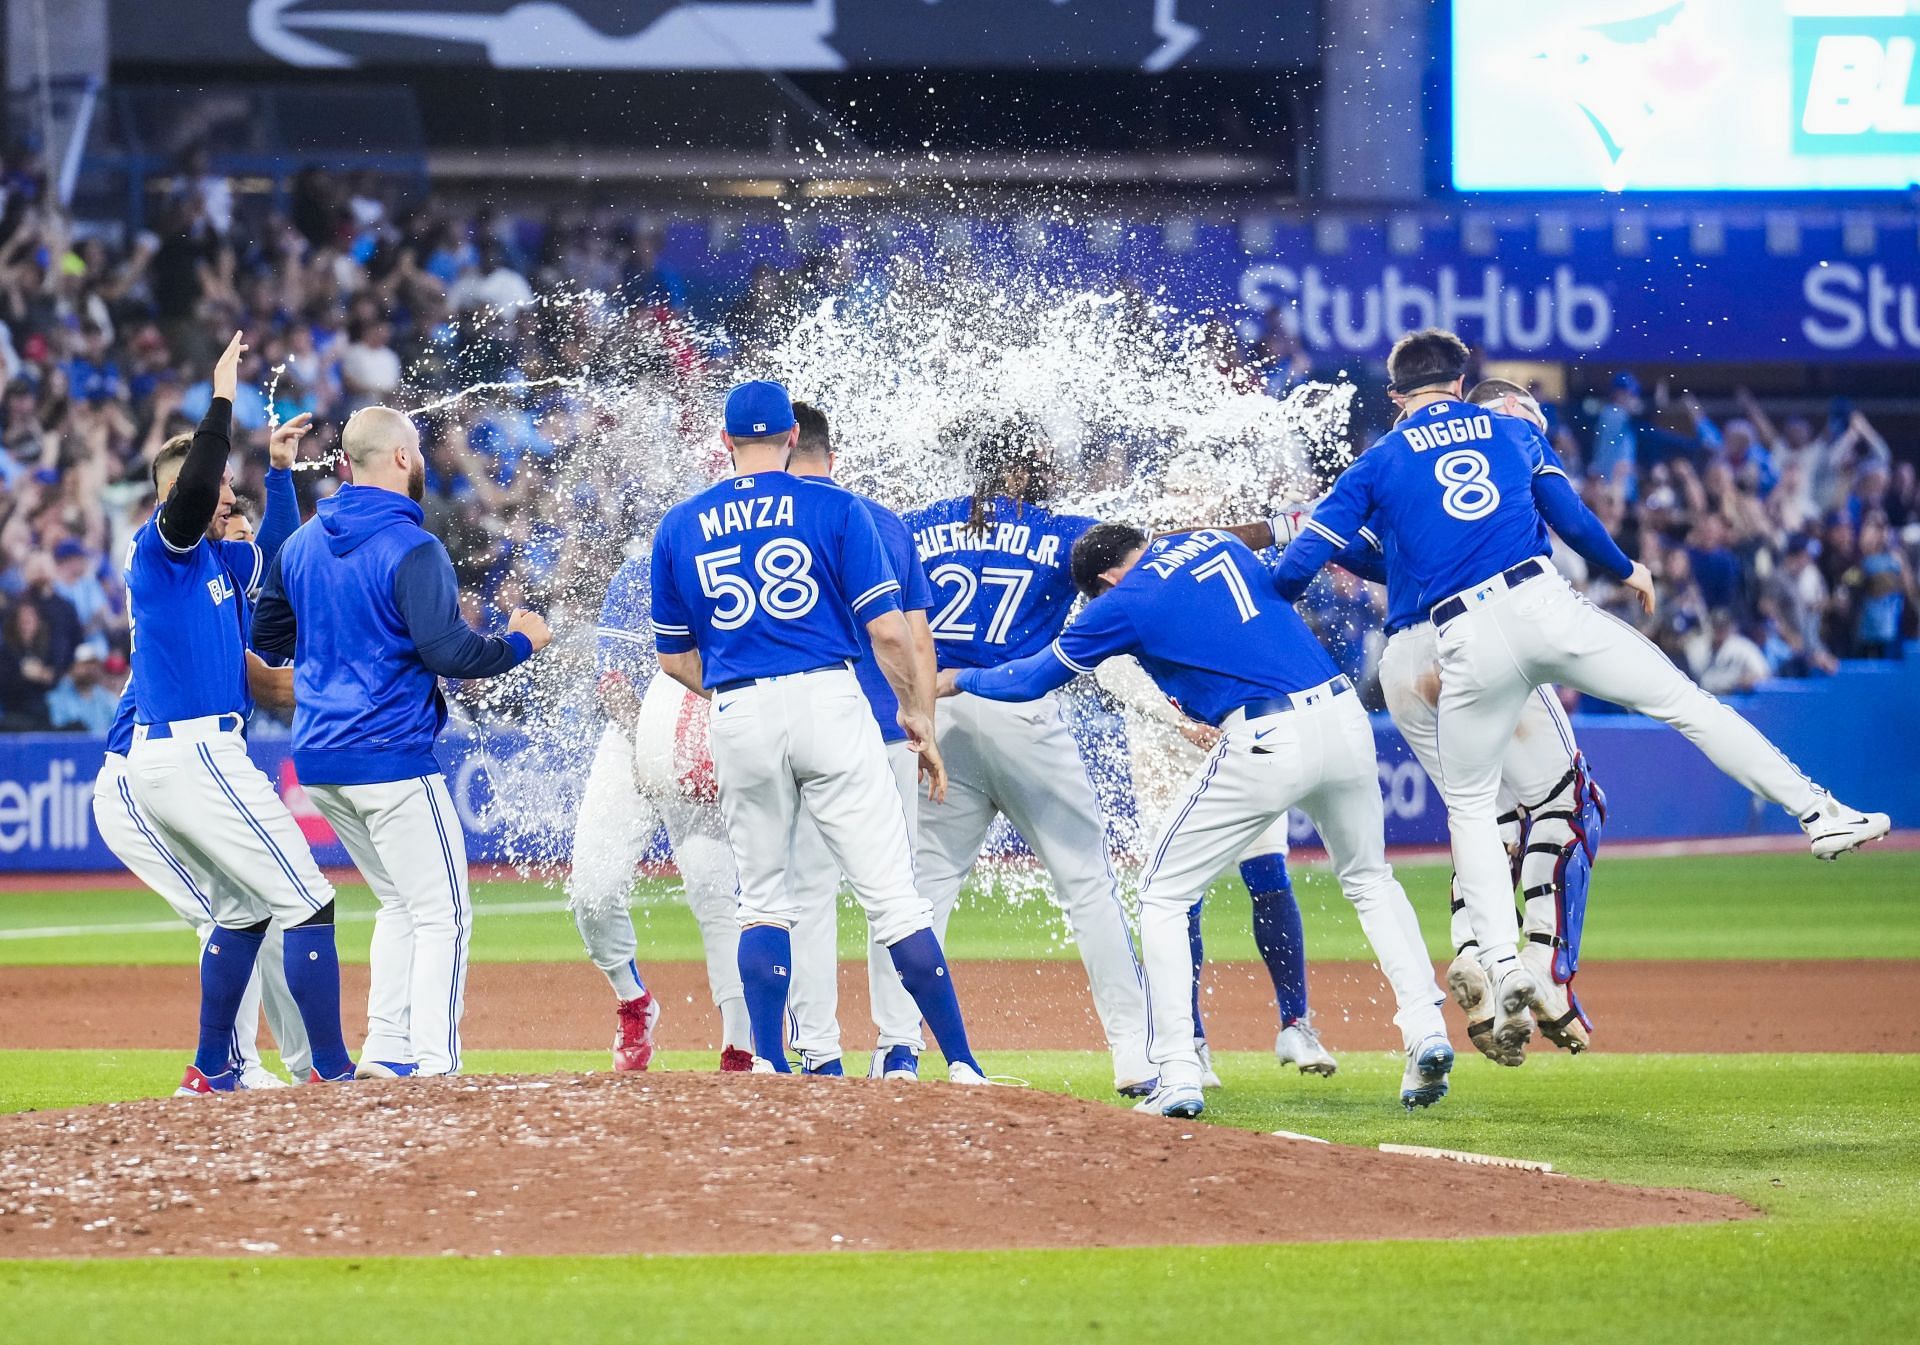 Teammates splash Vladimir Guerrero Jr.  of the Toronto Blue Jays with water after his walk-off hit to defeat the New York Yankees.